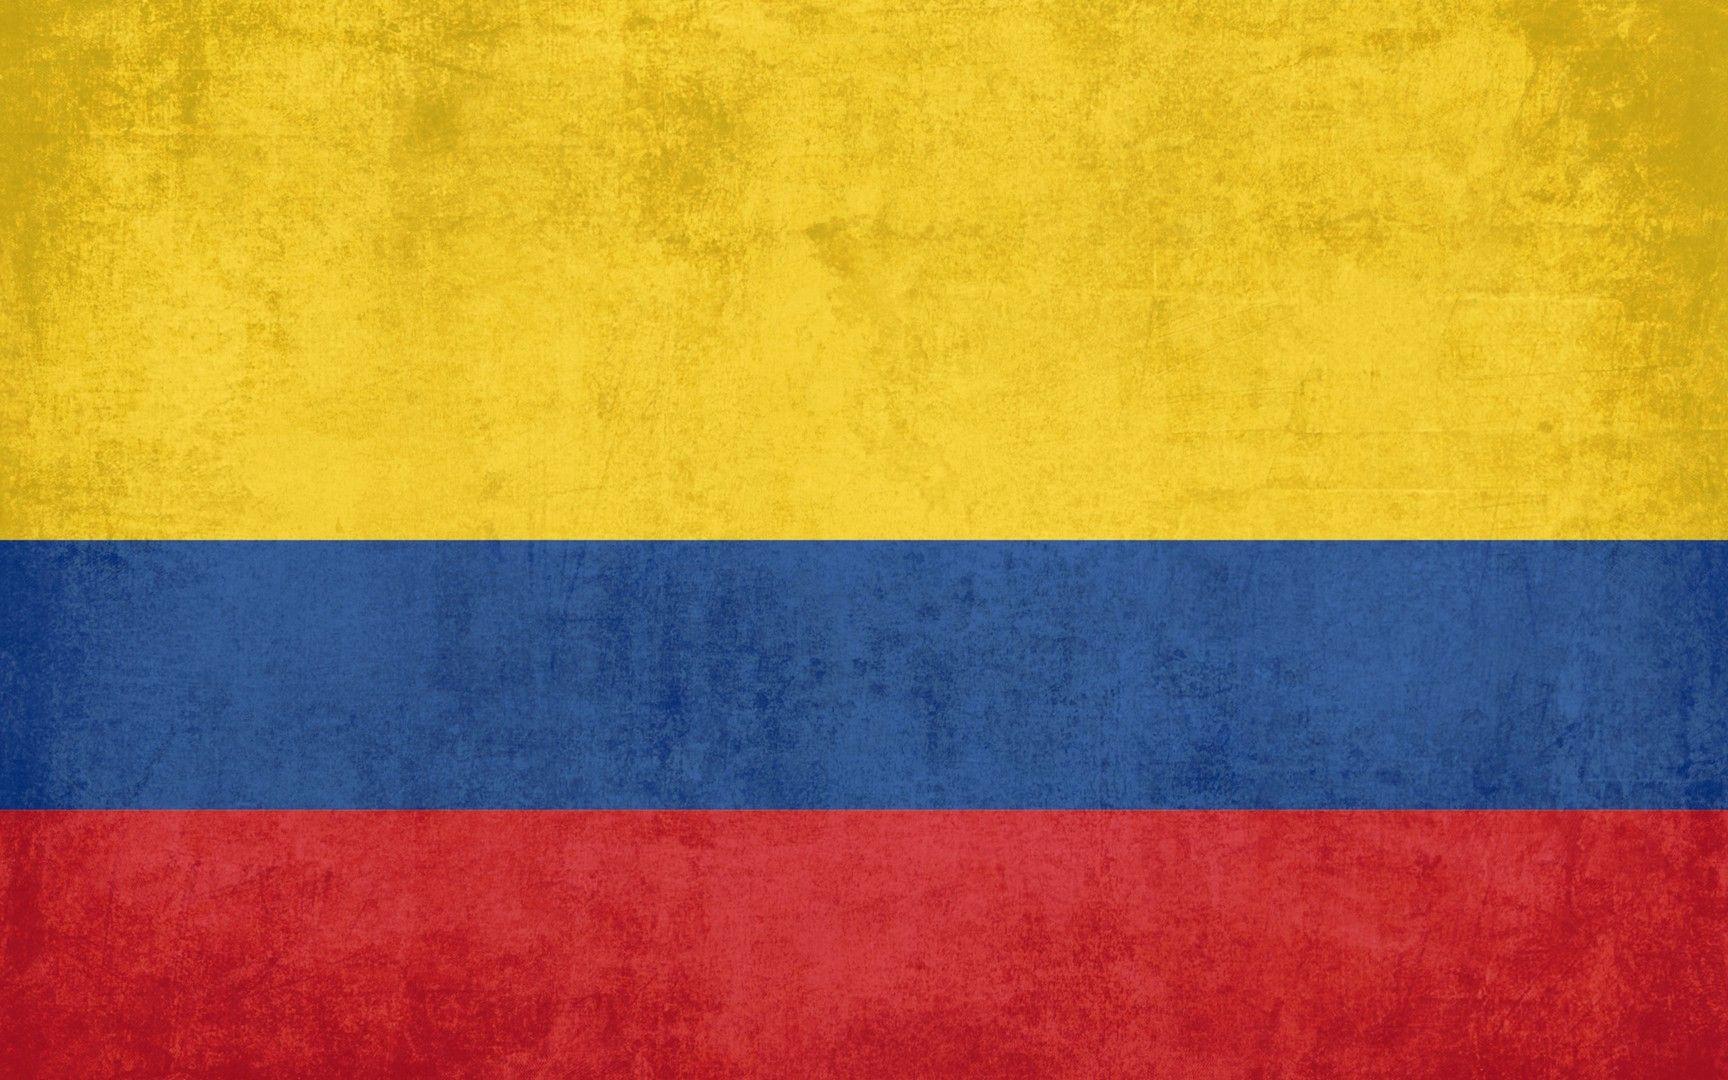 Flag of Colombia wallpaper. Education. Colombia flag